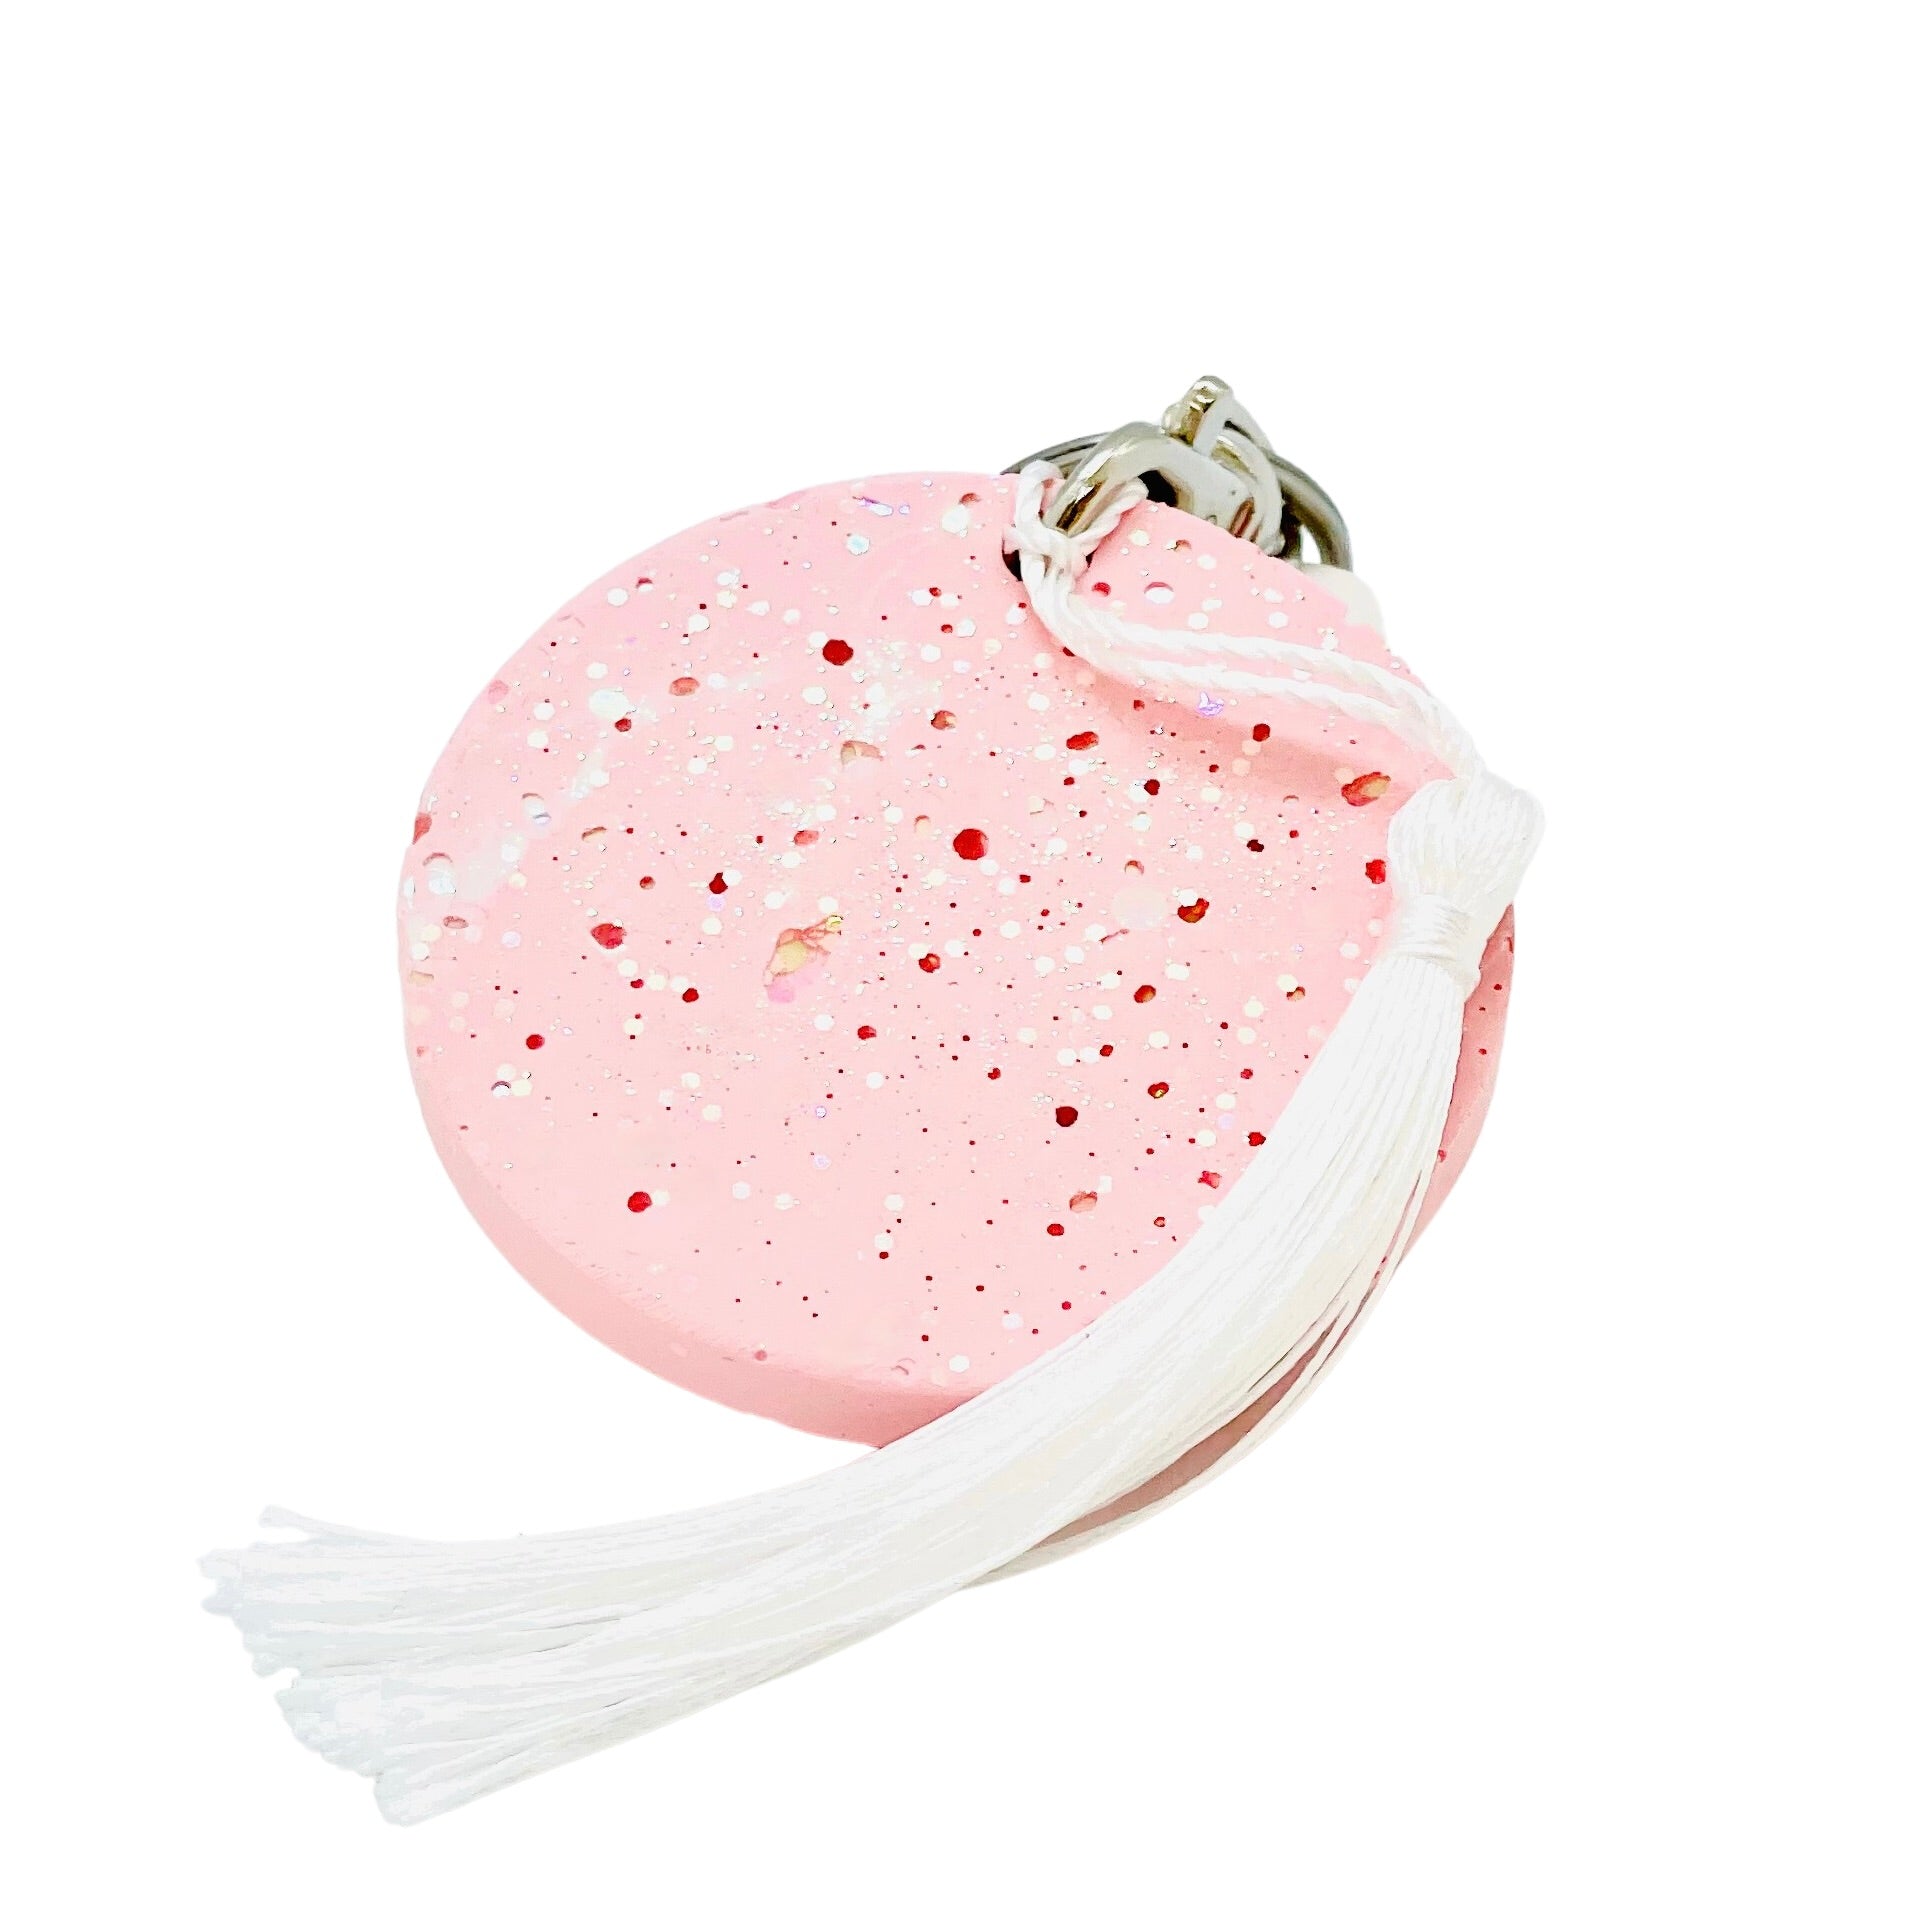 A round Jesmonite disc keyring measuring 6cm in diameter coloured with baby pink pigment and sprinkled with pink glitter.